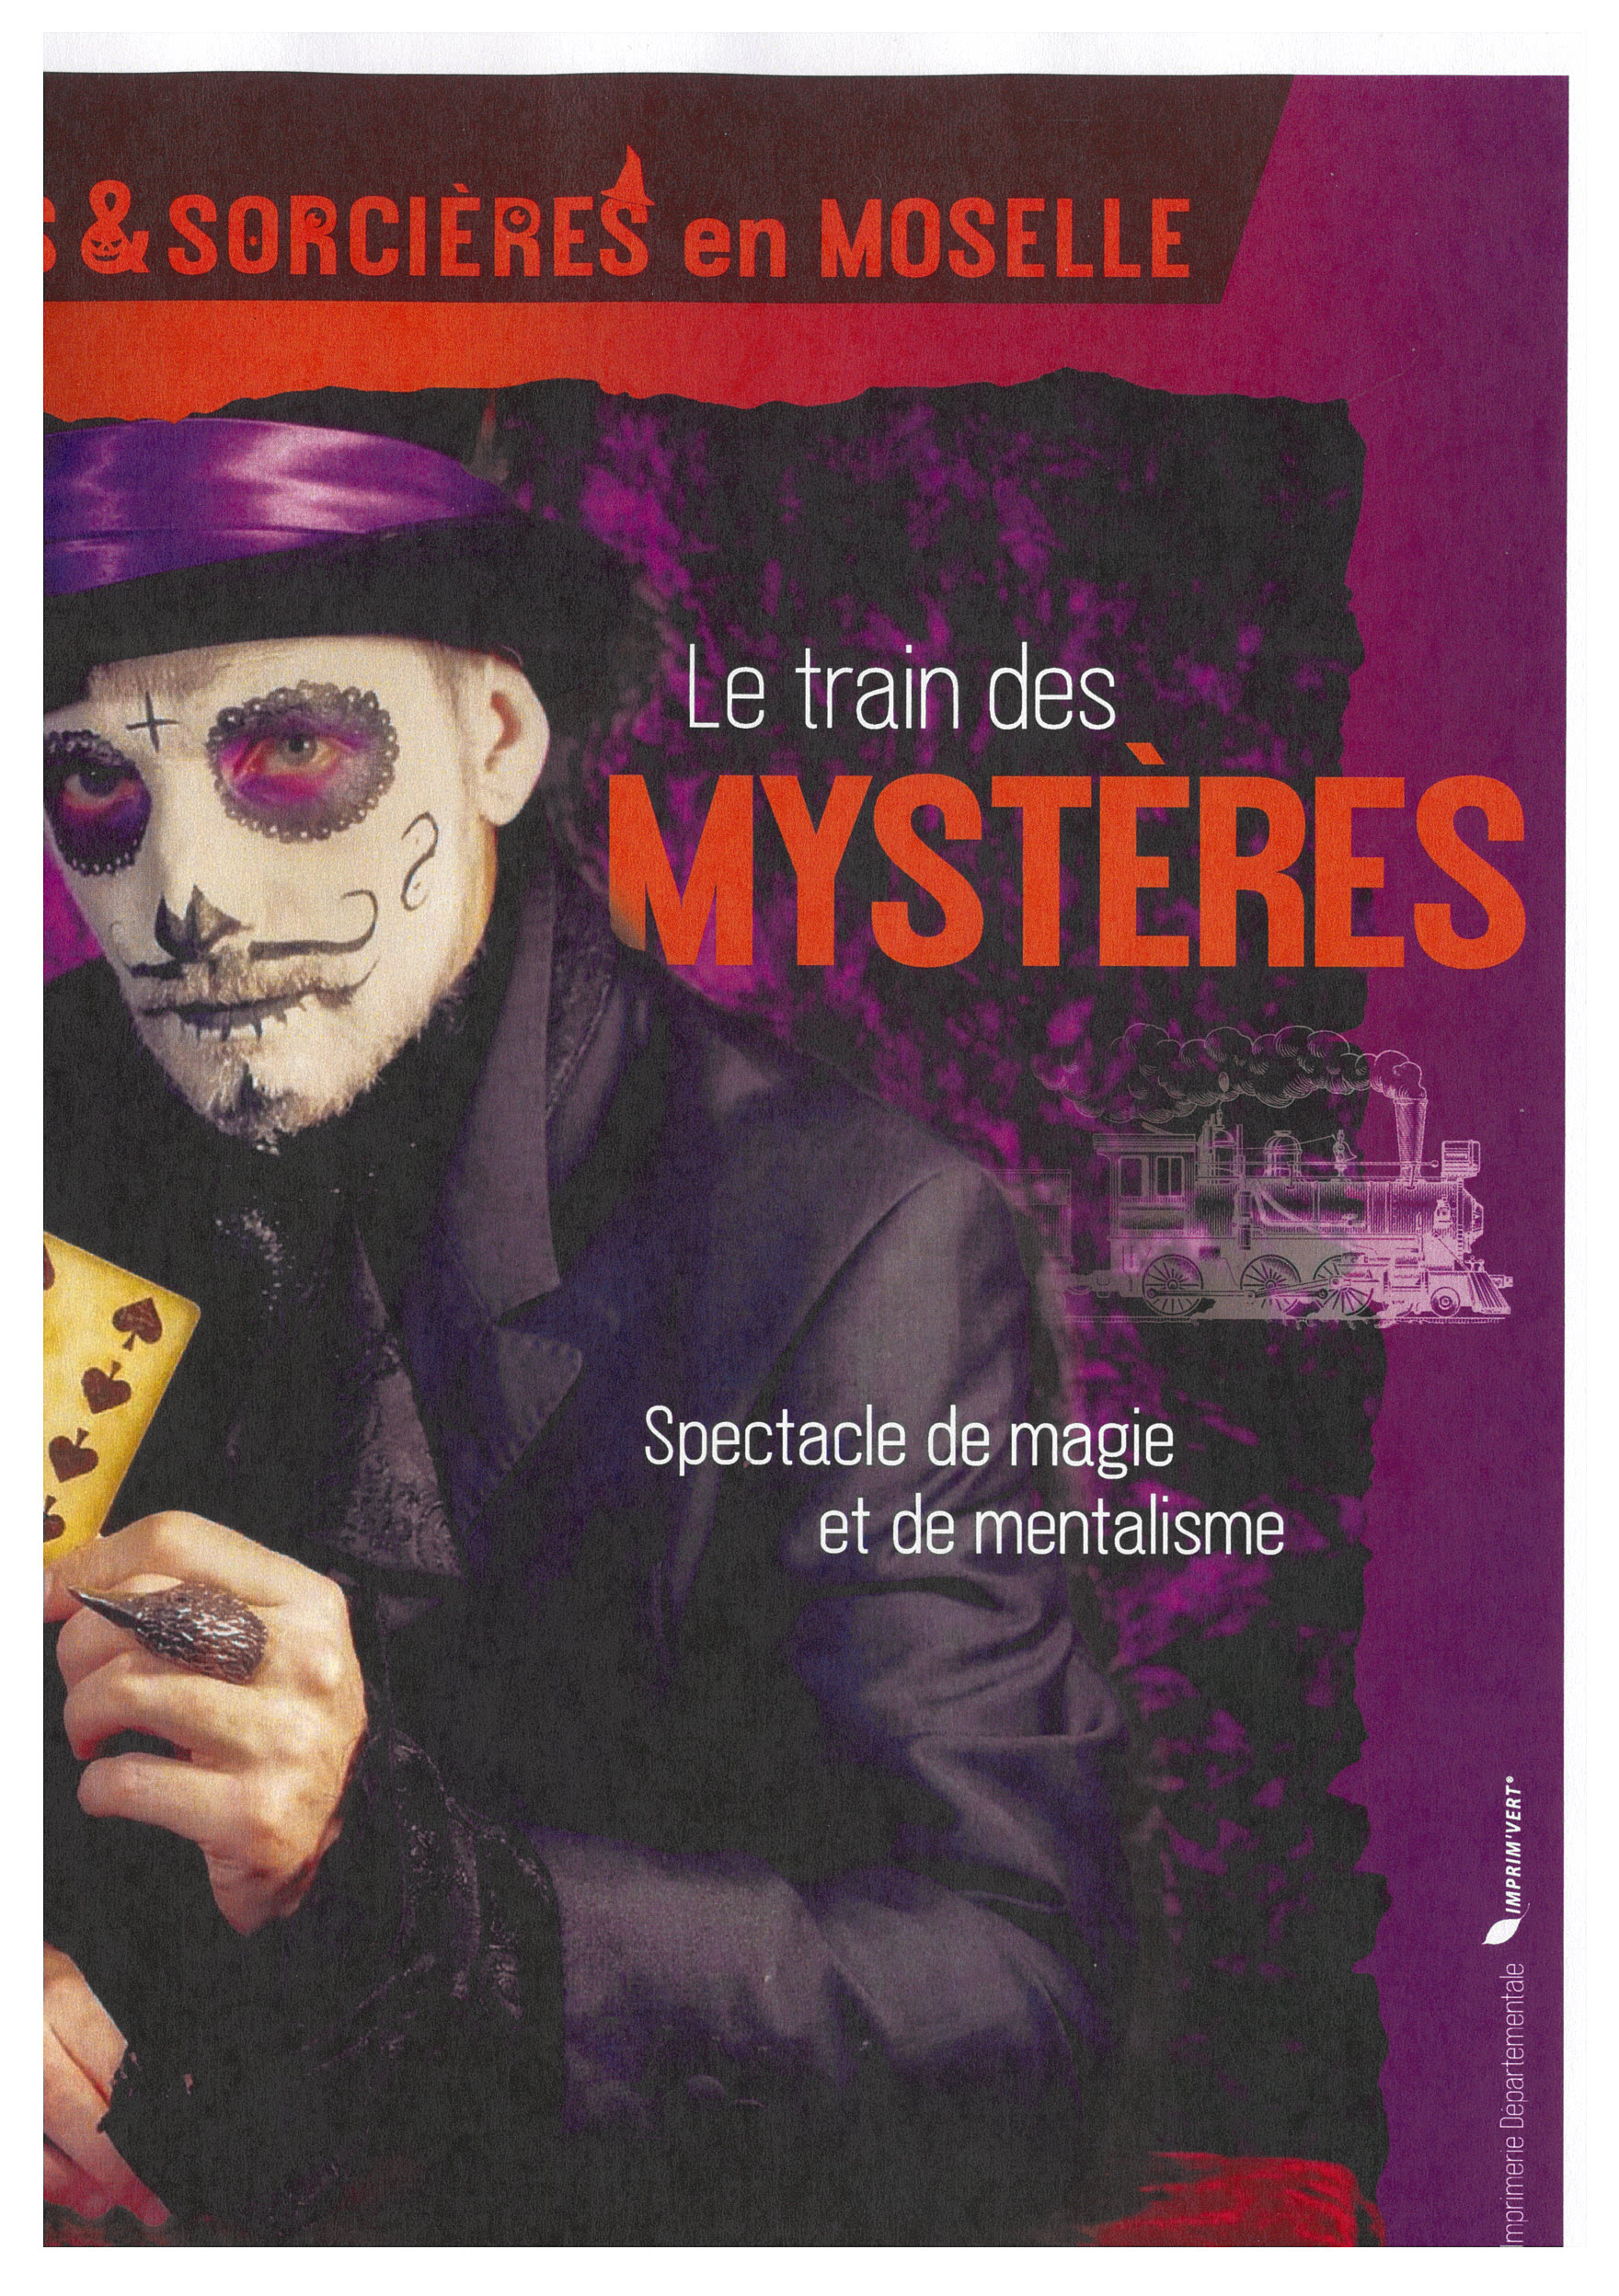 Show - The train of mysteries